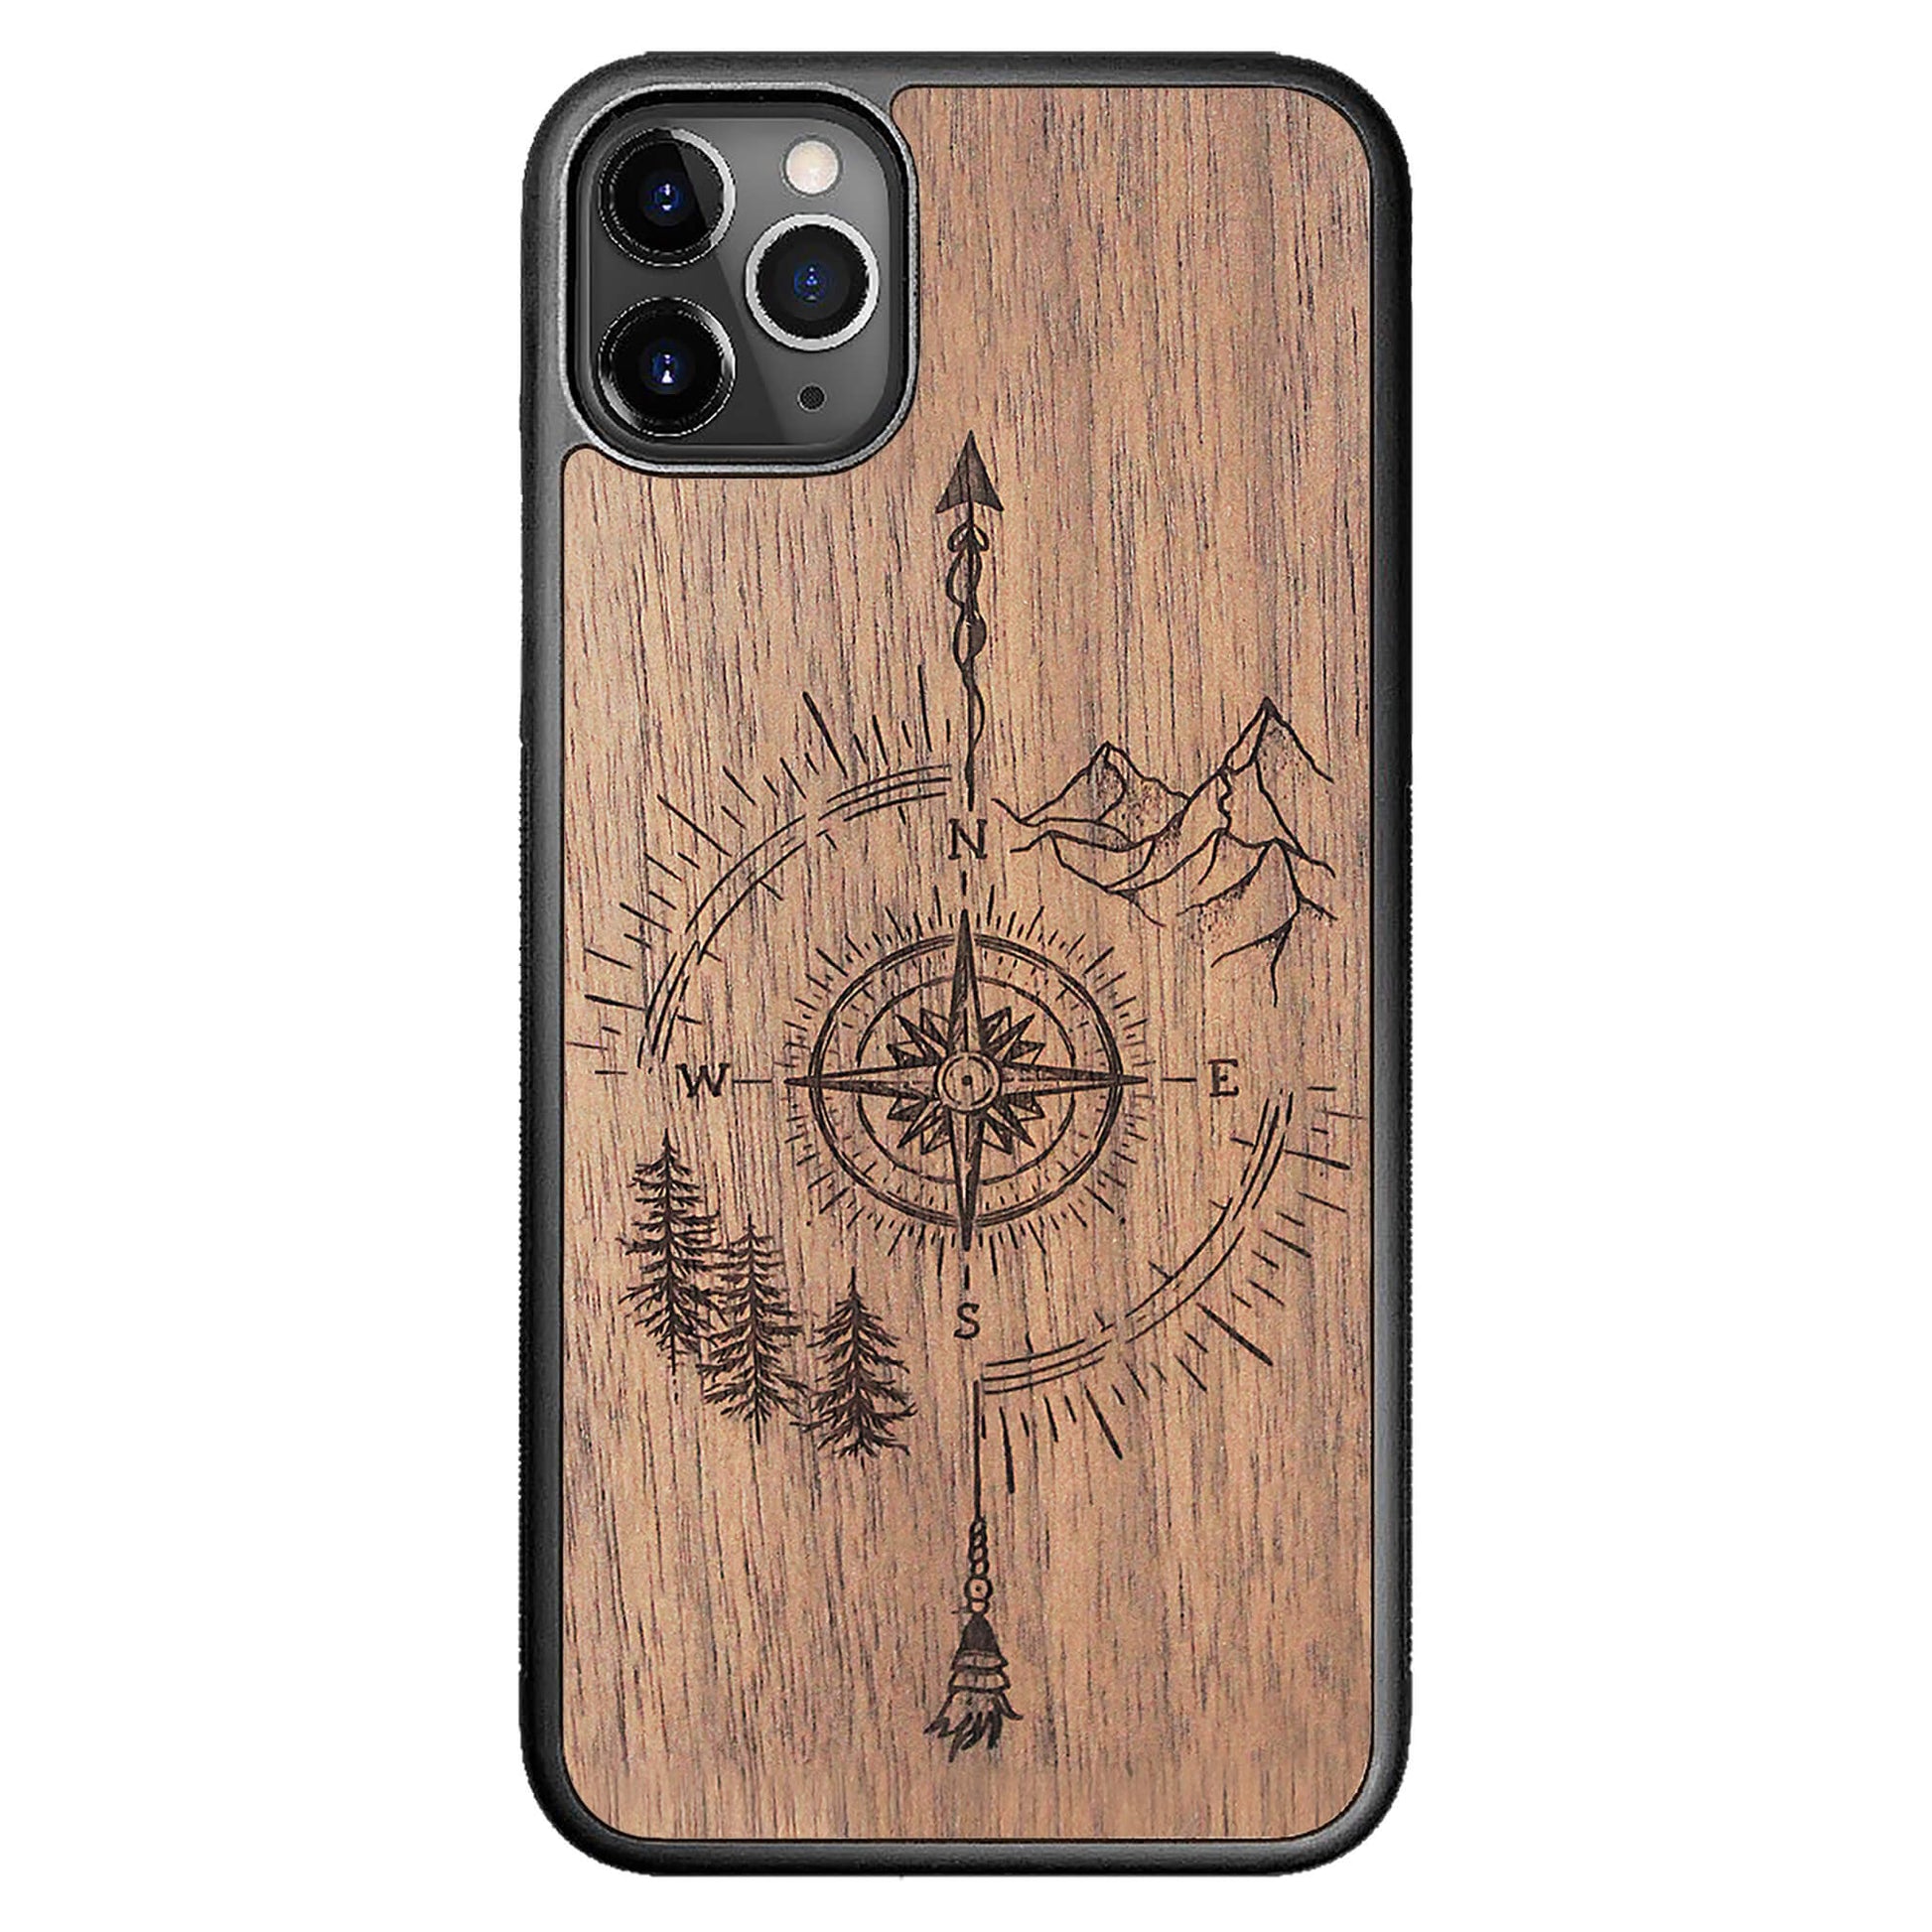 Wooden Case for iPhone 11 Pro Max Just Go